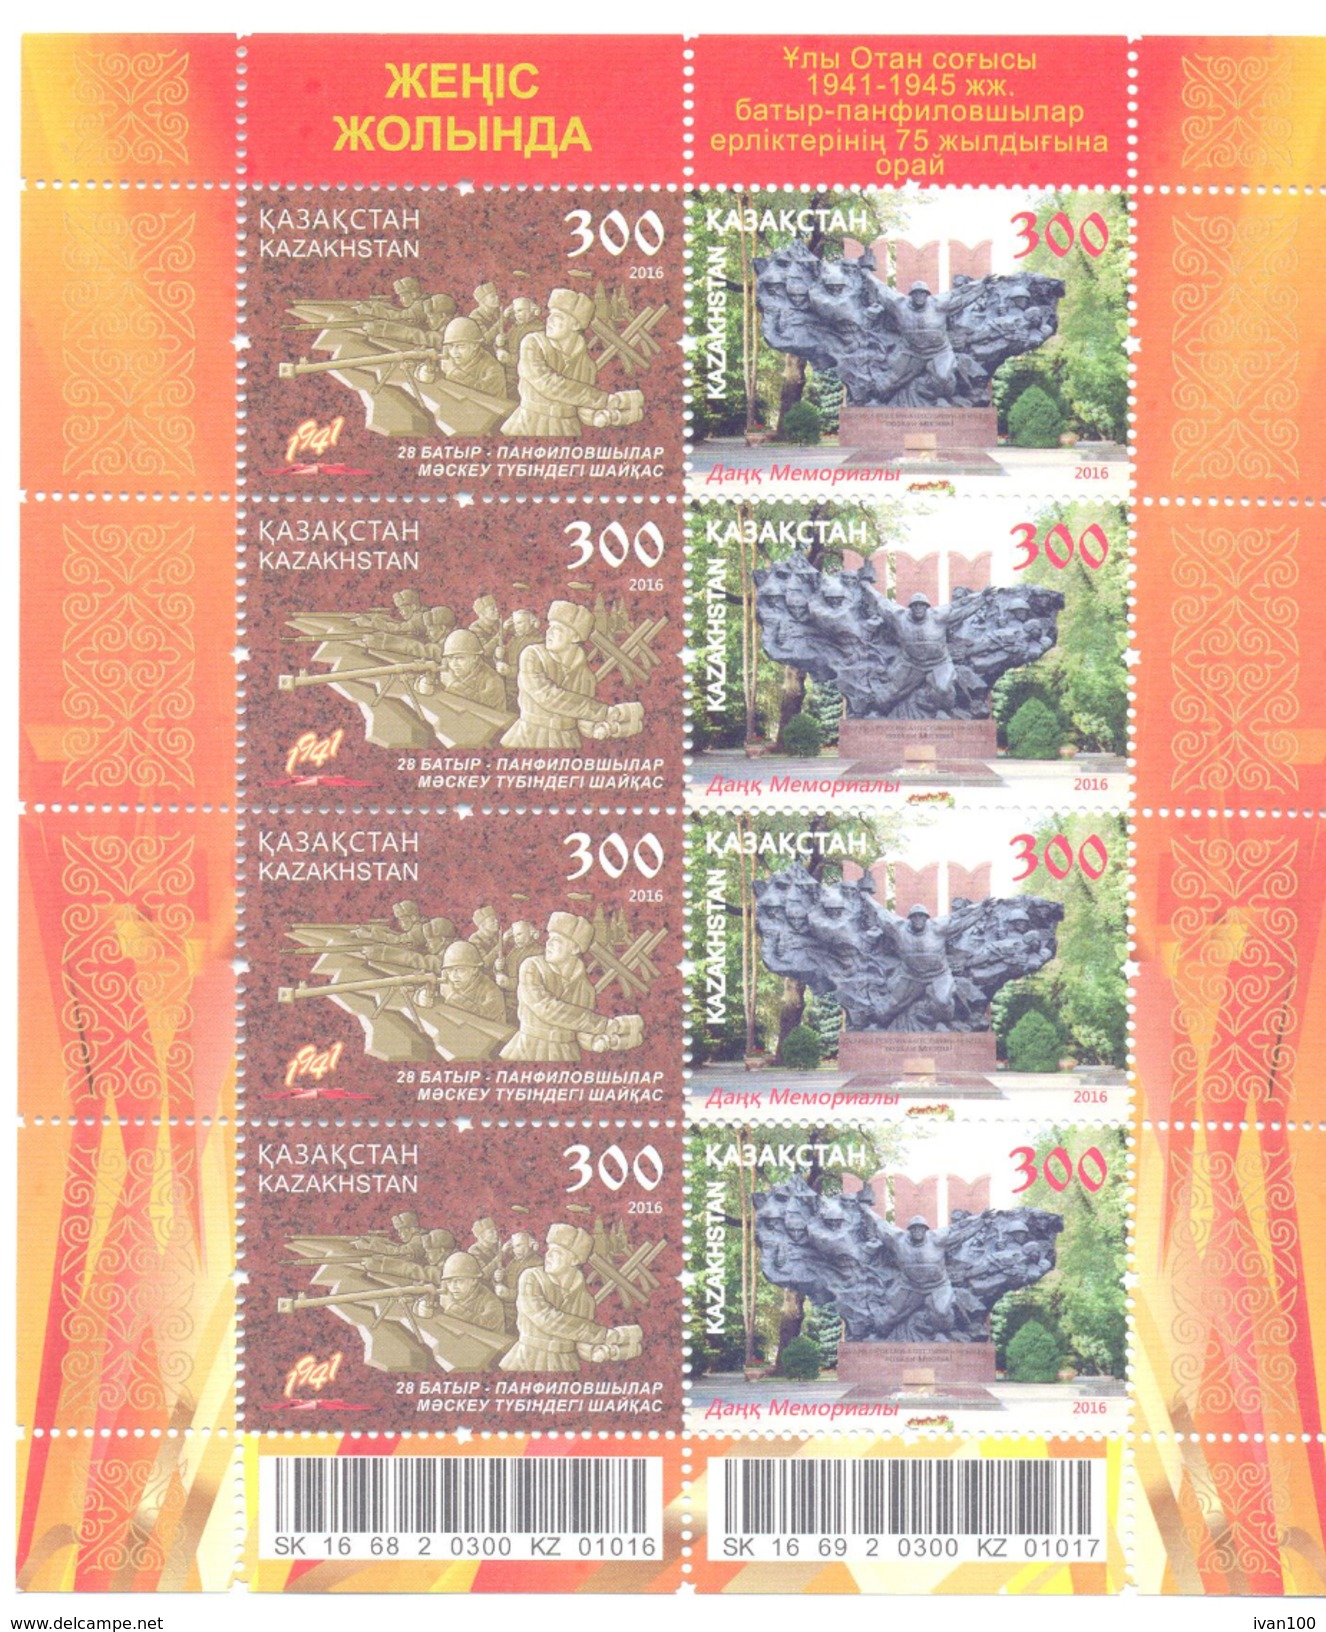 2016. Kazakhstan, 75y Of Feat Panfilov Heroes, Joint Issue With Russia, Sheetlet,  Mint/** - Kasachstan